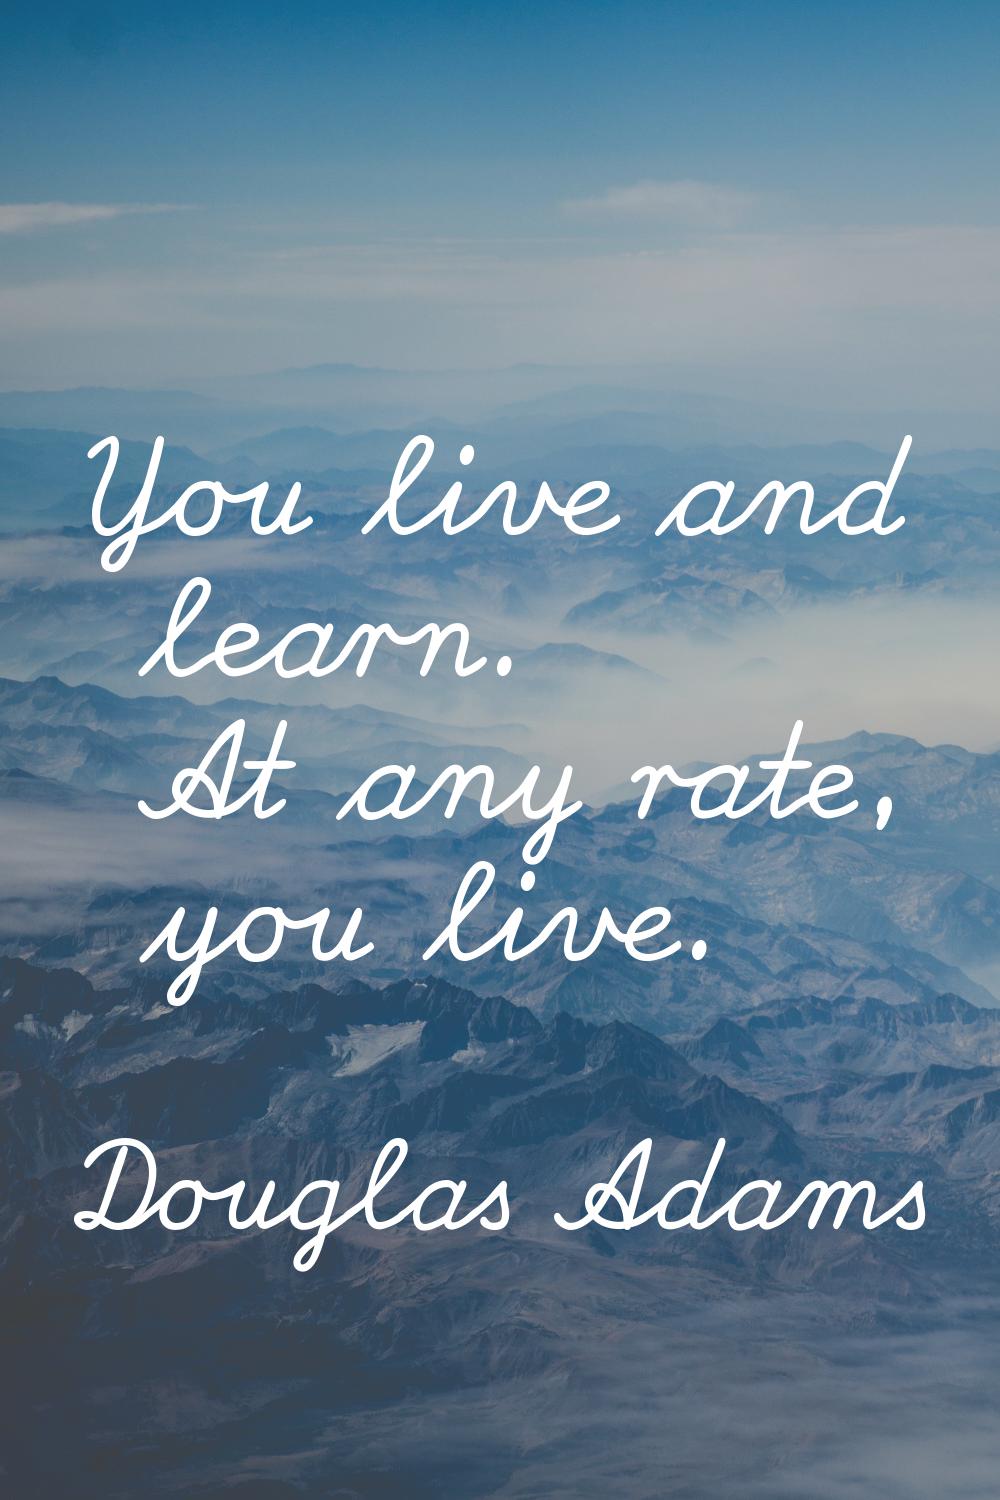 You live and learn. At any rate, you live.